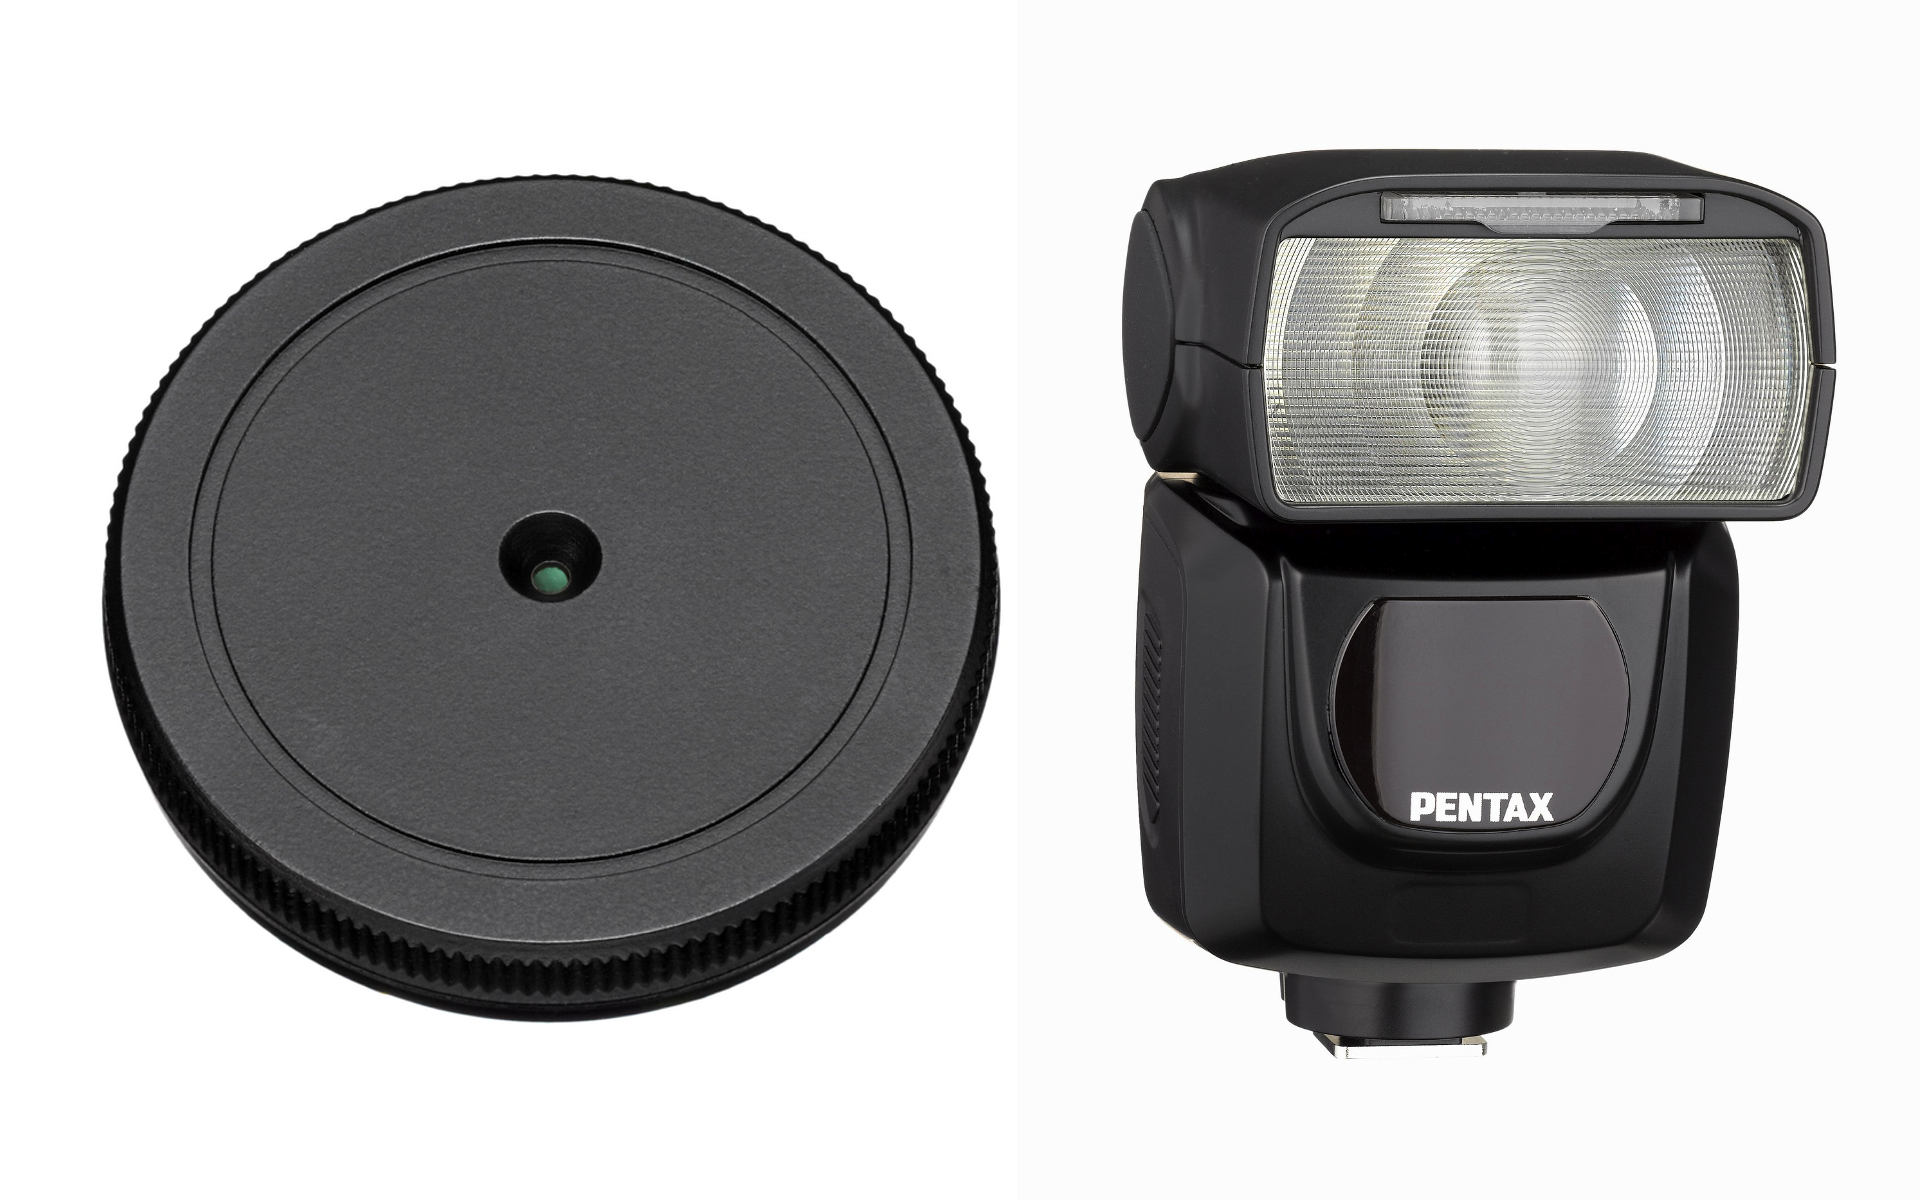 Pentax Shows Off a New Q Body Cap Lens and Flash